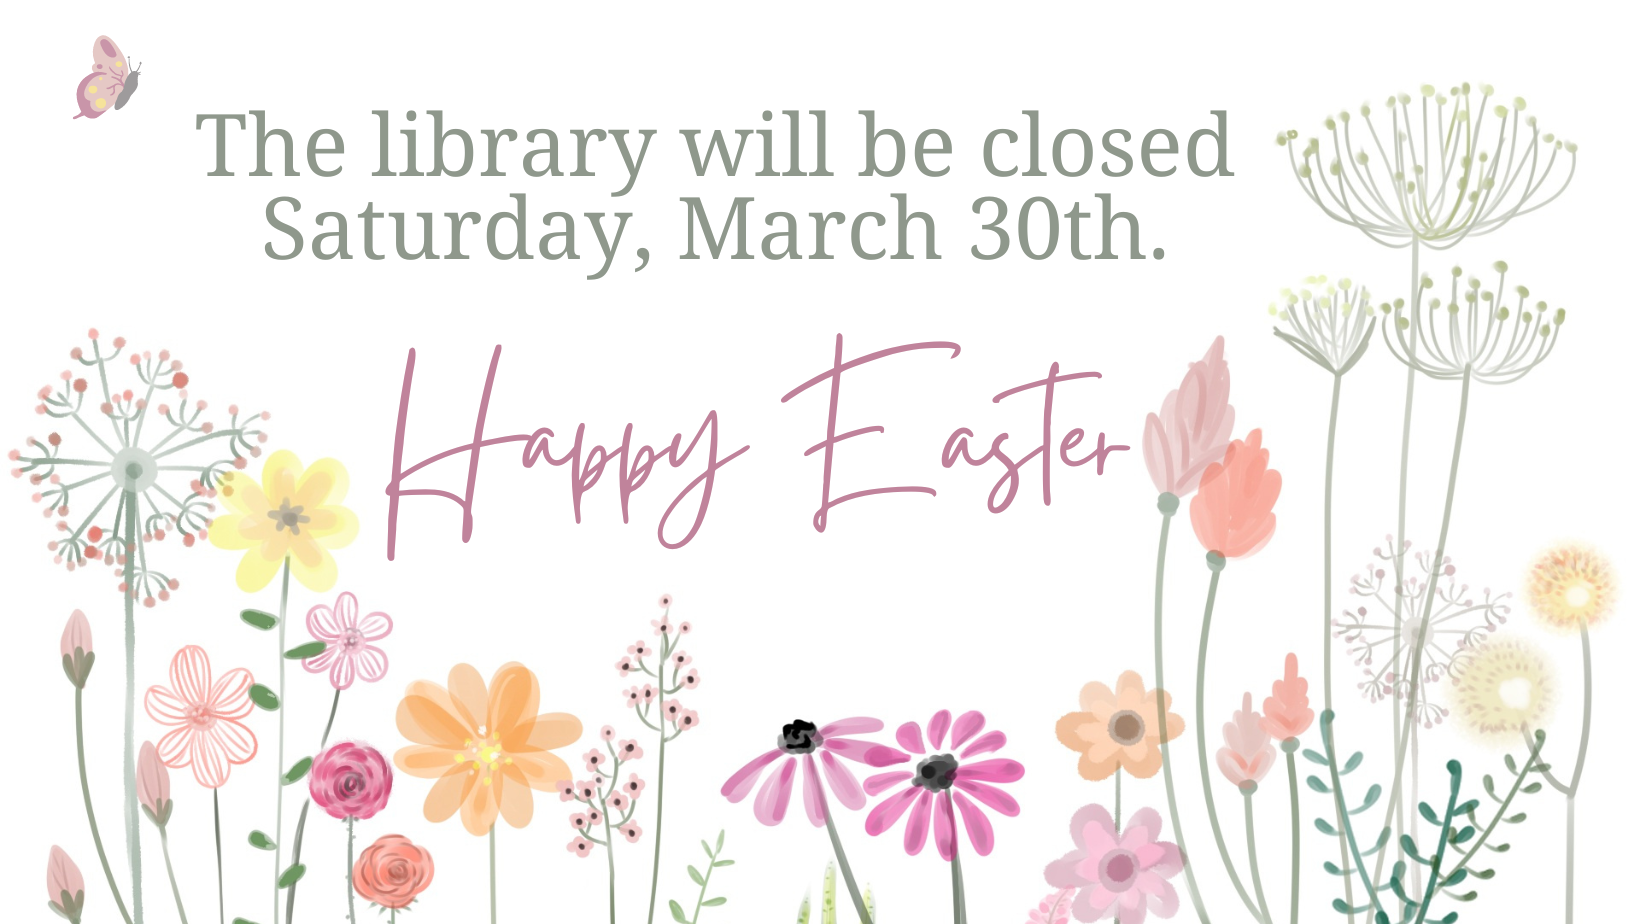 The library will be closed on Saturday, March 30th